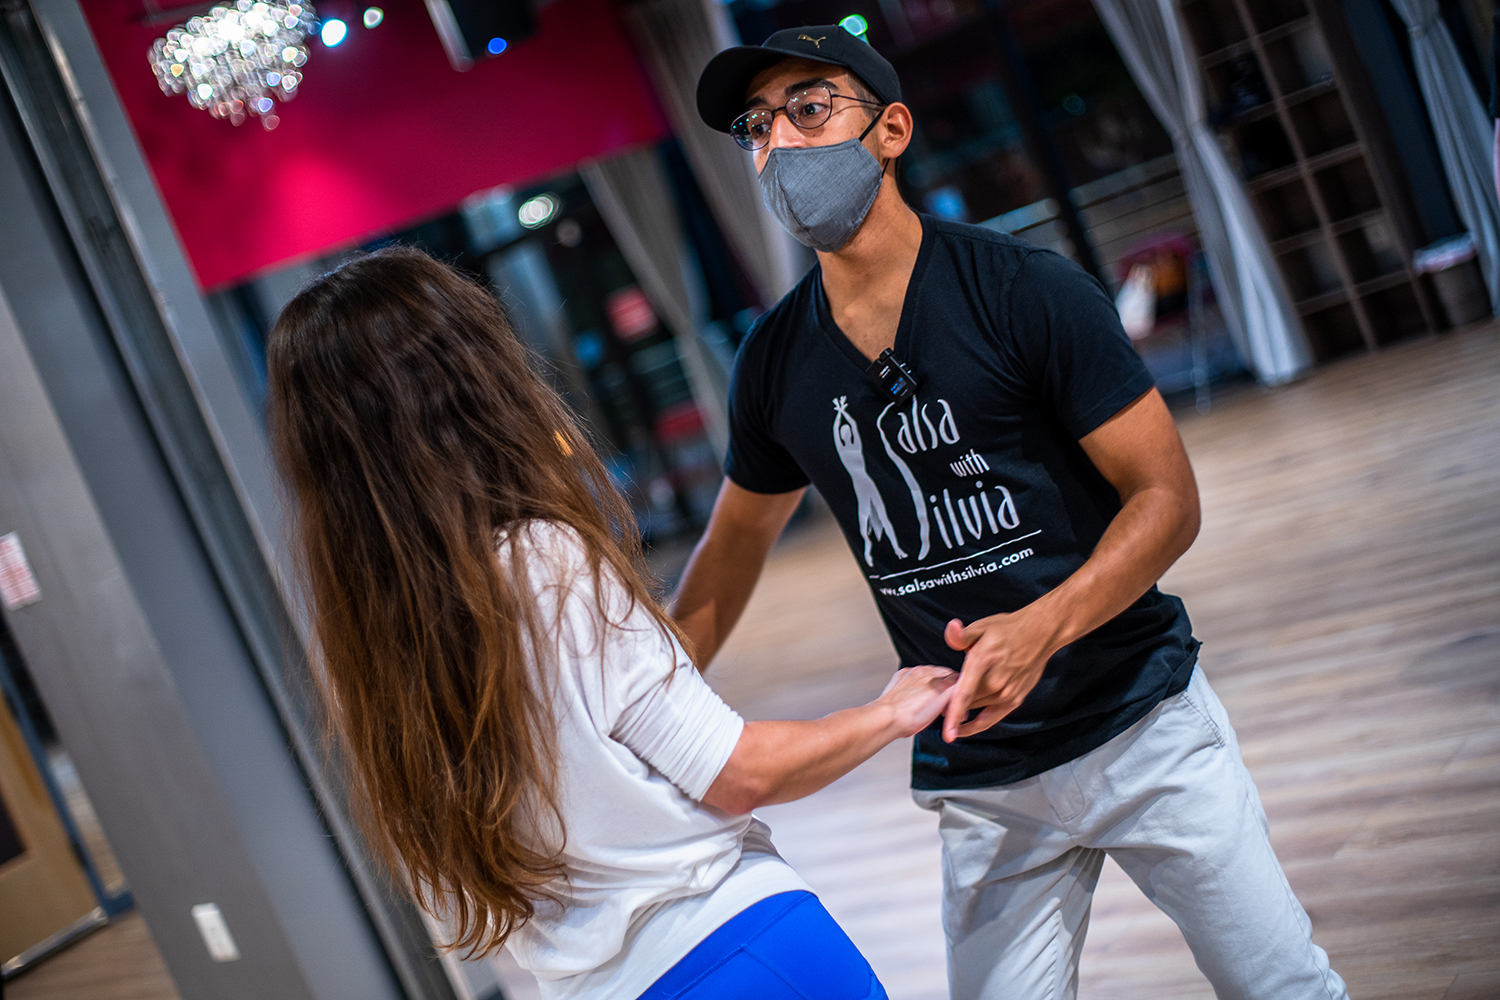 Salsa and Bachata classes during COVID-19 at the Salsa With Silvia dance studio in Bethesda. Safety precautions in place.